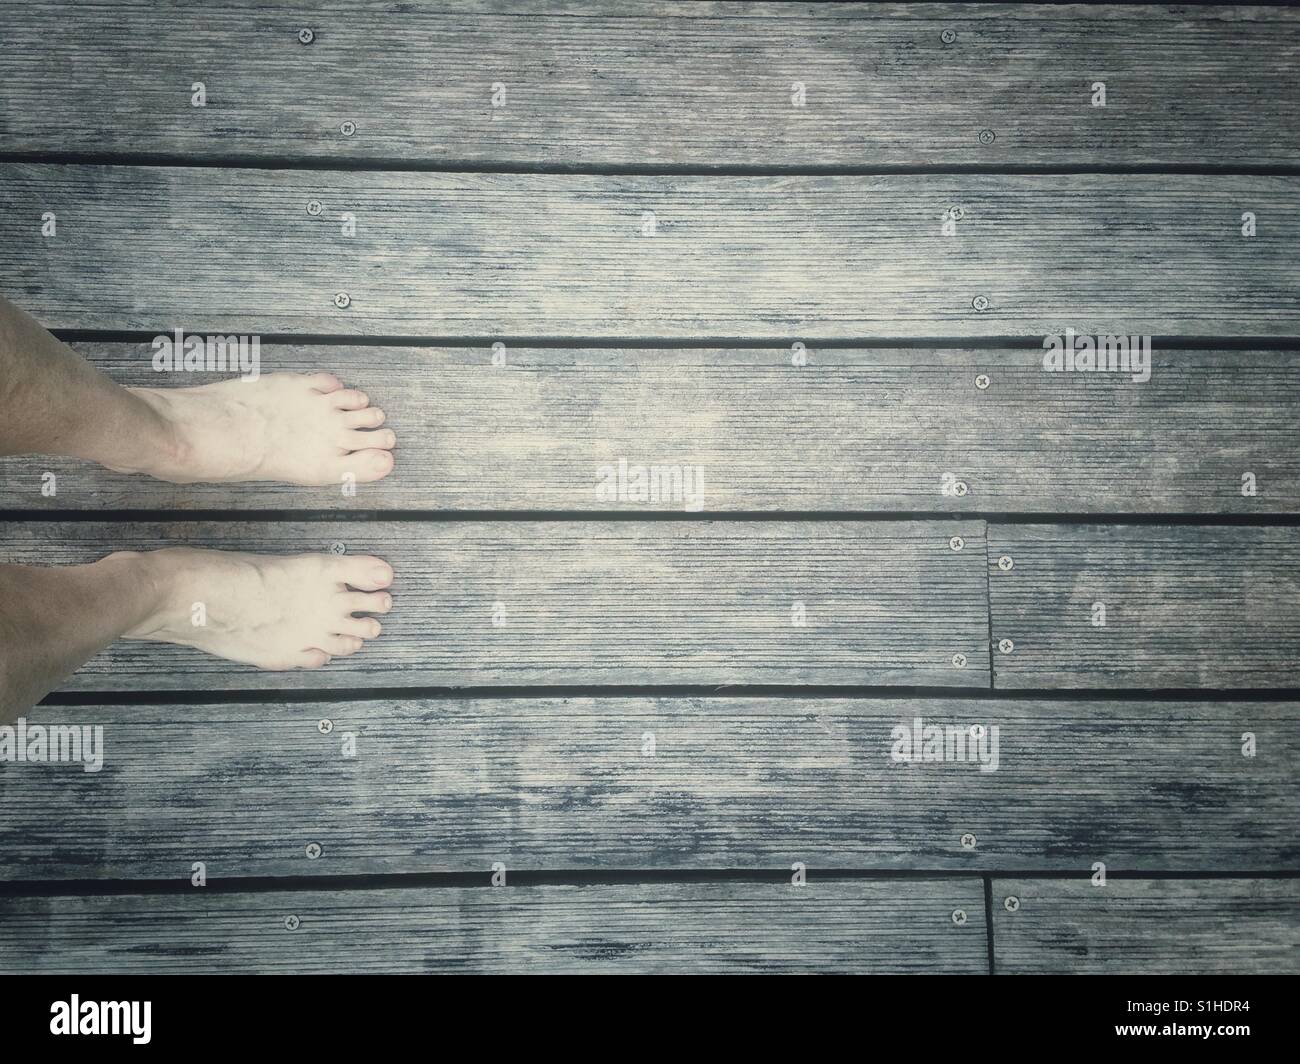 Bare foot on a wooden board Stock Photo